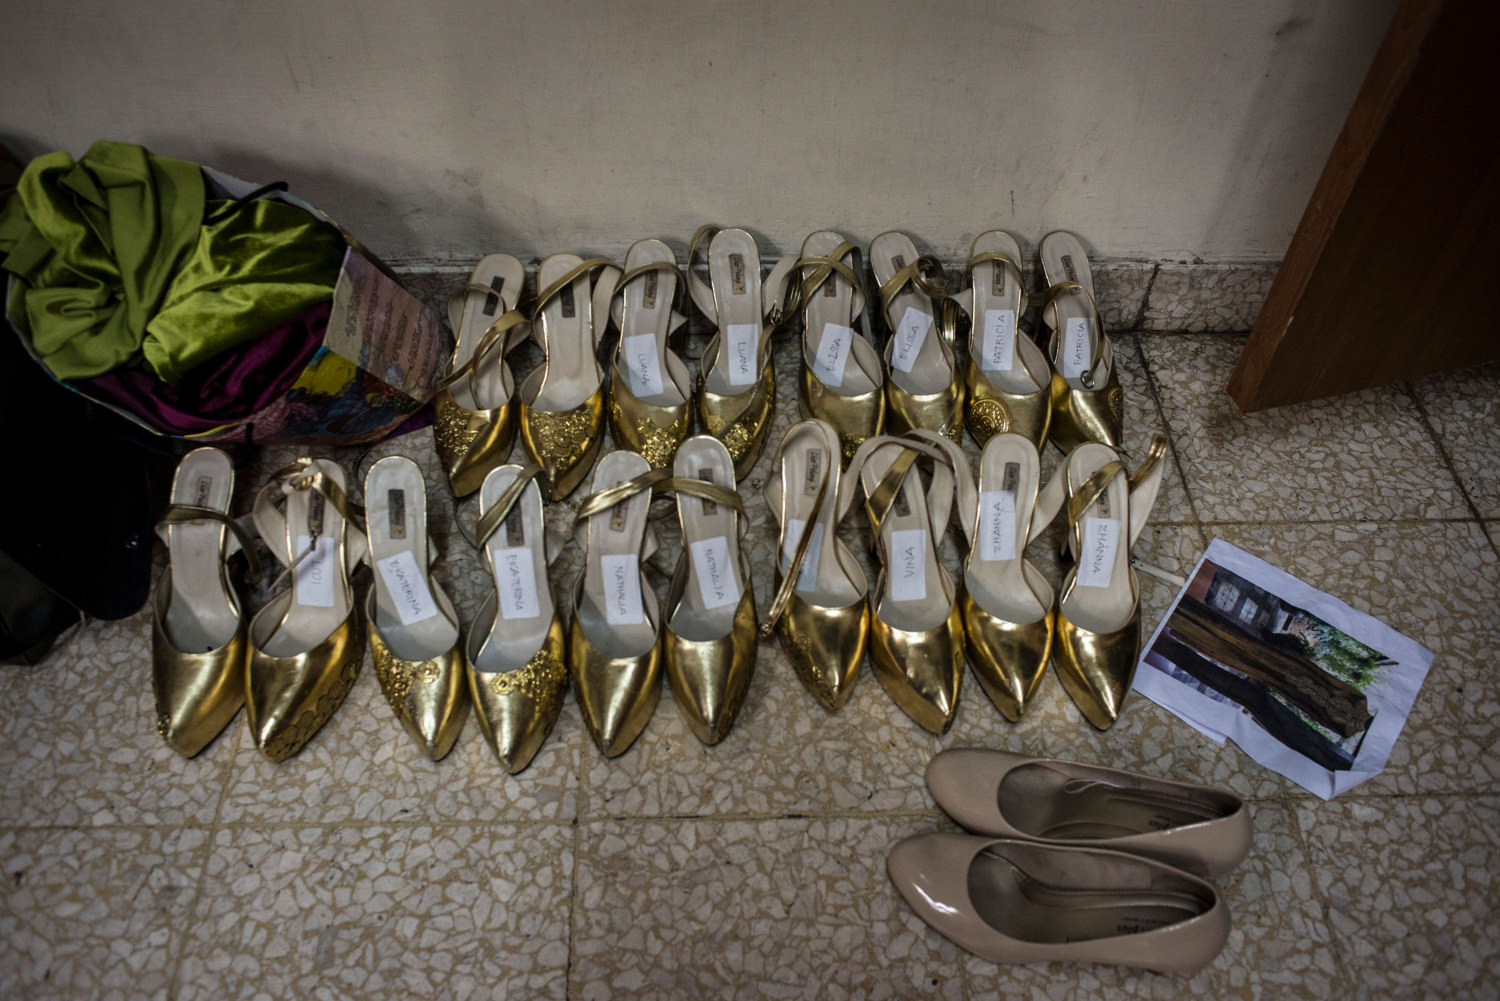  Shoes are labeled and laid out in preparations for the Grand Finale on November 21st, 2014 in Yogakarta, Indonesia.
 